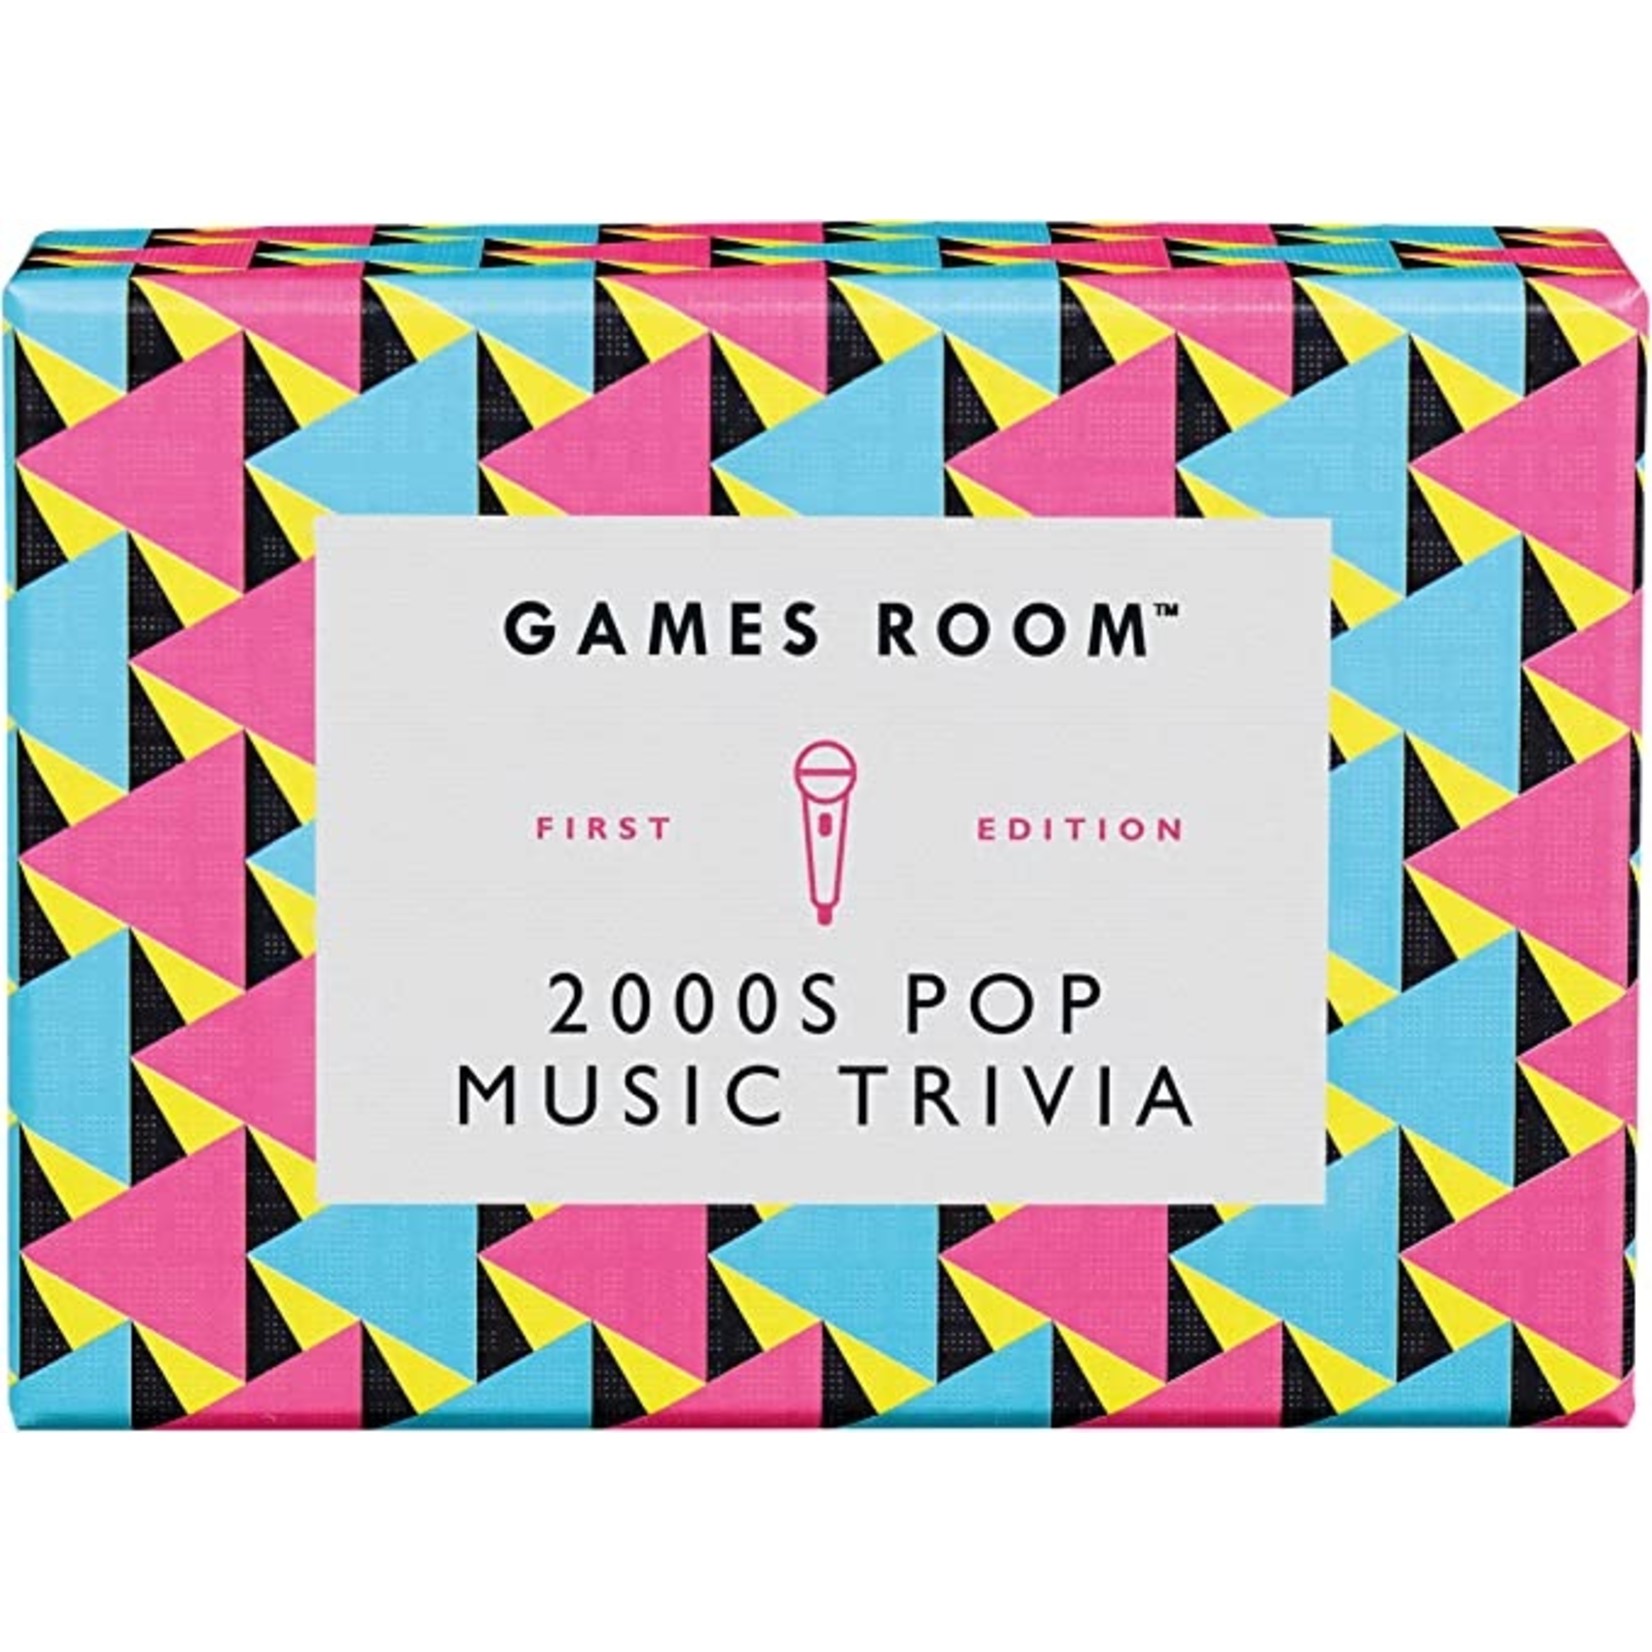 Ridley's Games Room First Edition Brain Teasers 140 Trivia Question Cards